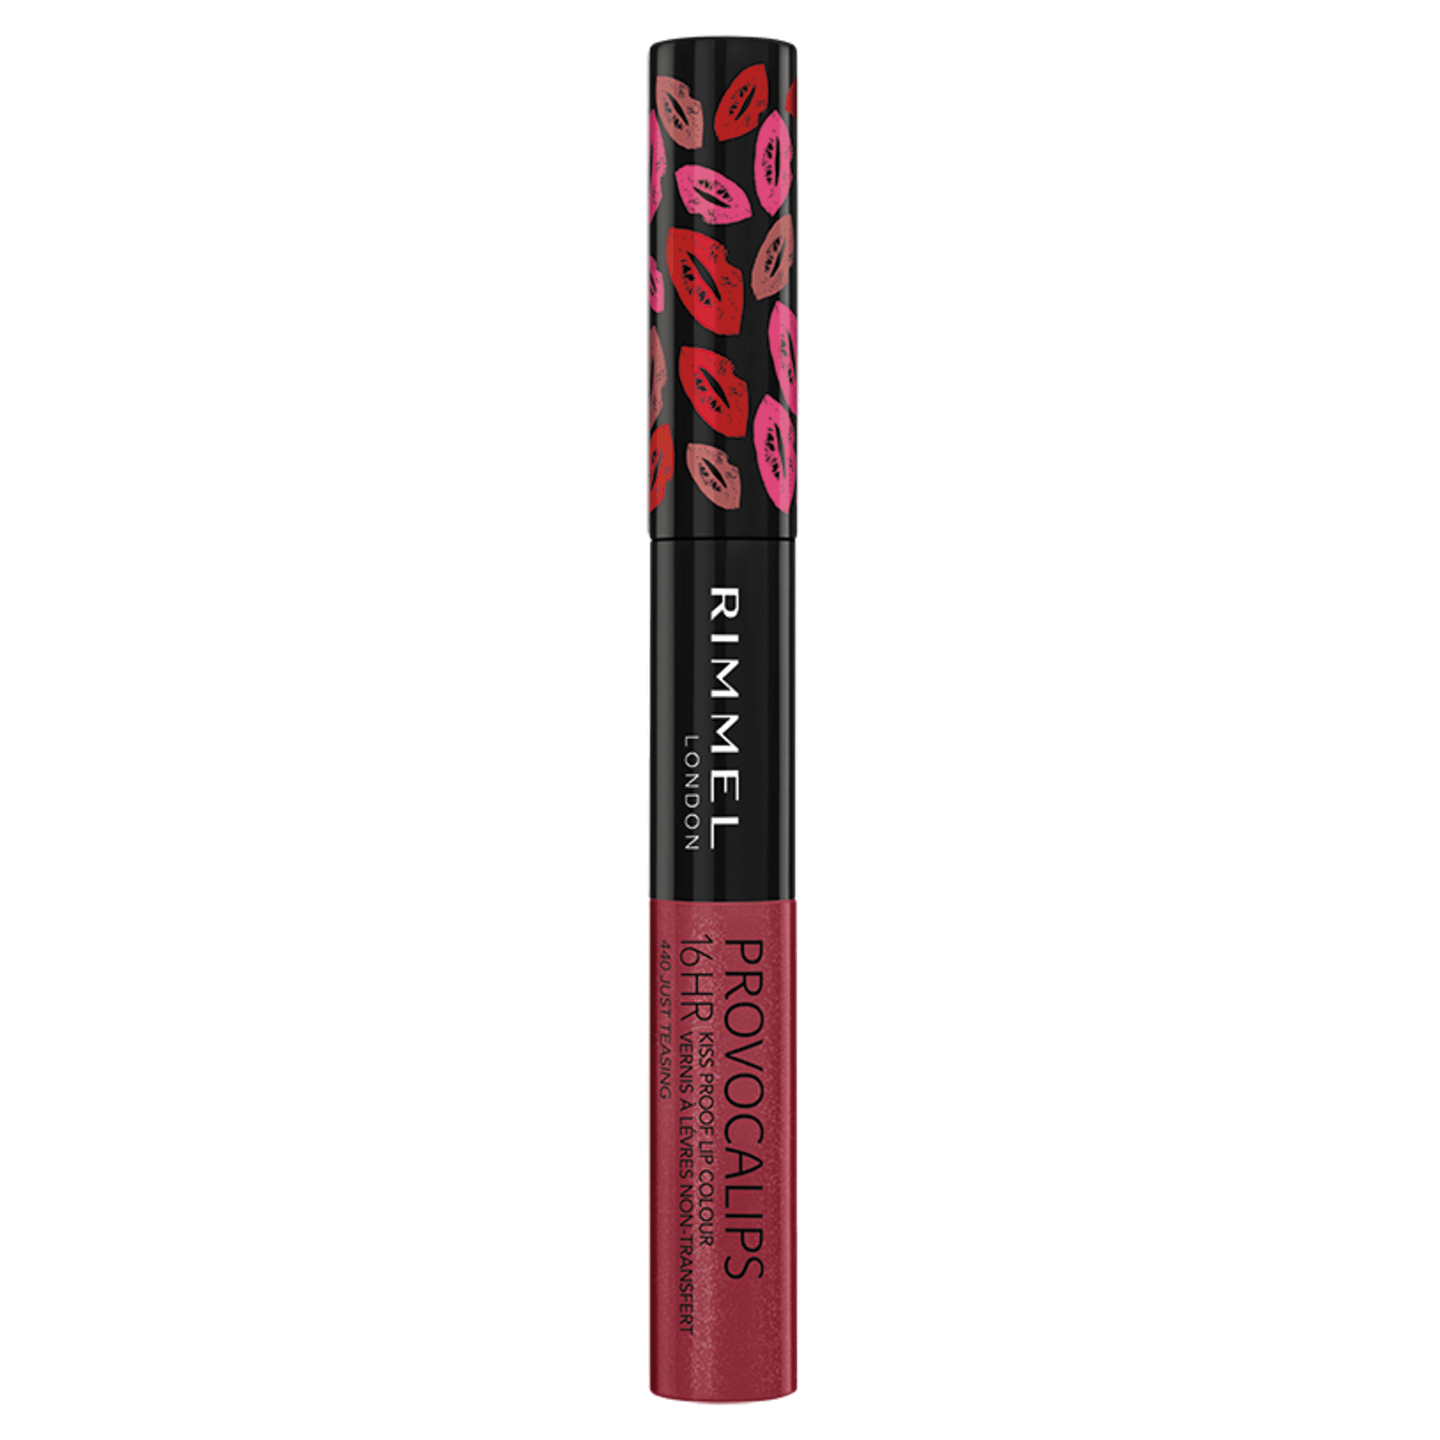 Rimmel Provocalips Lip Stain, Just Teasing, 0.14 Fluid Ounce Just Teasing 0.14 Fl Oz (Pack of 1)